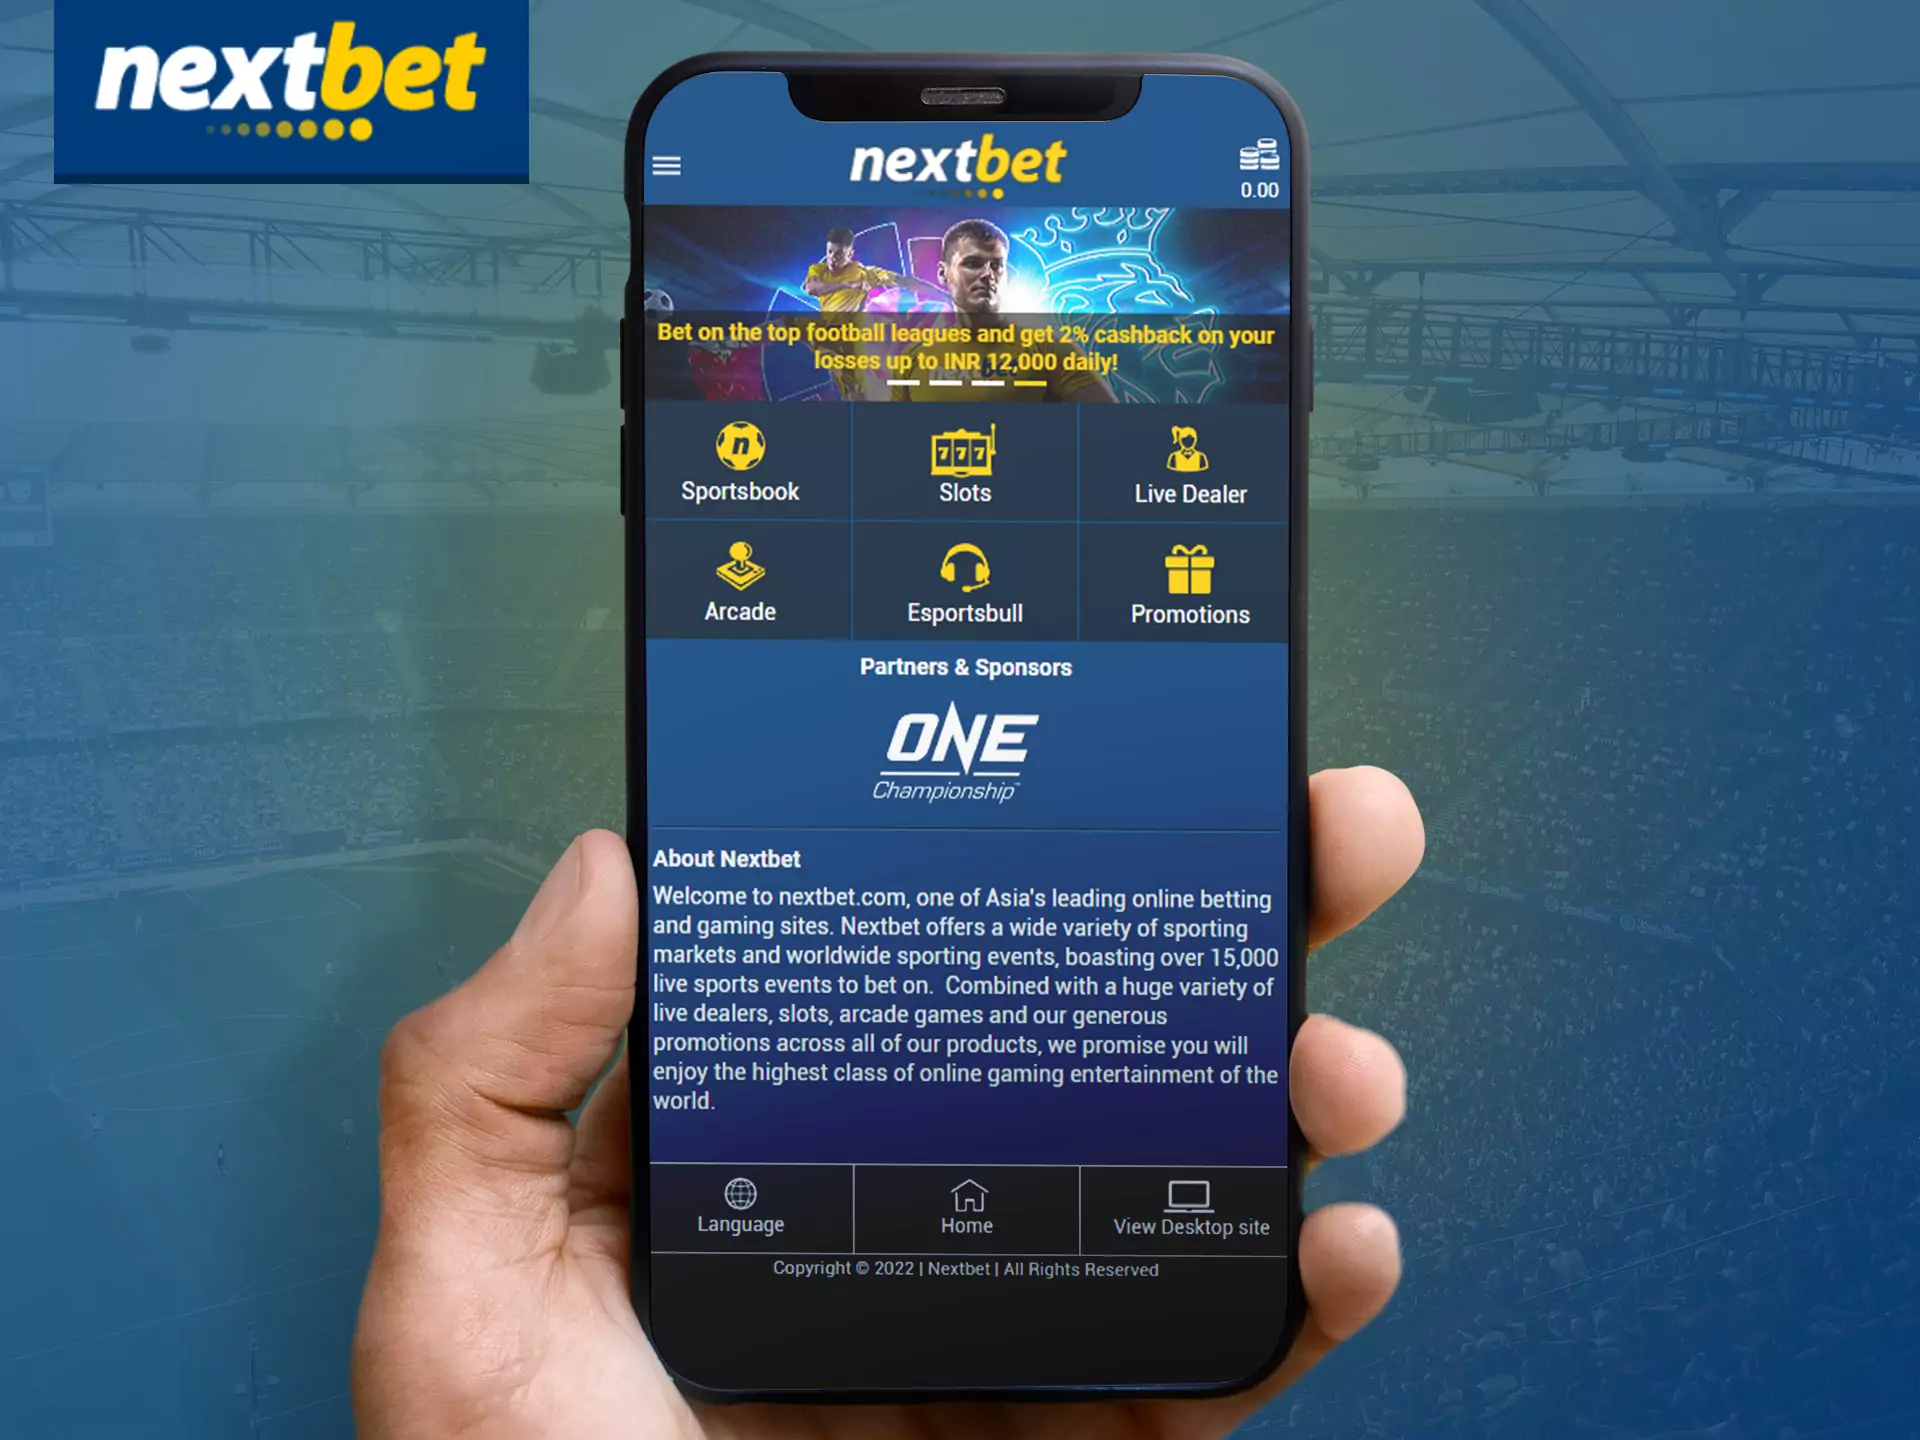 Download the Nextbet app and launch it to start playing.